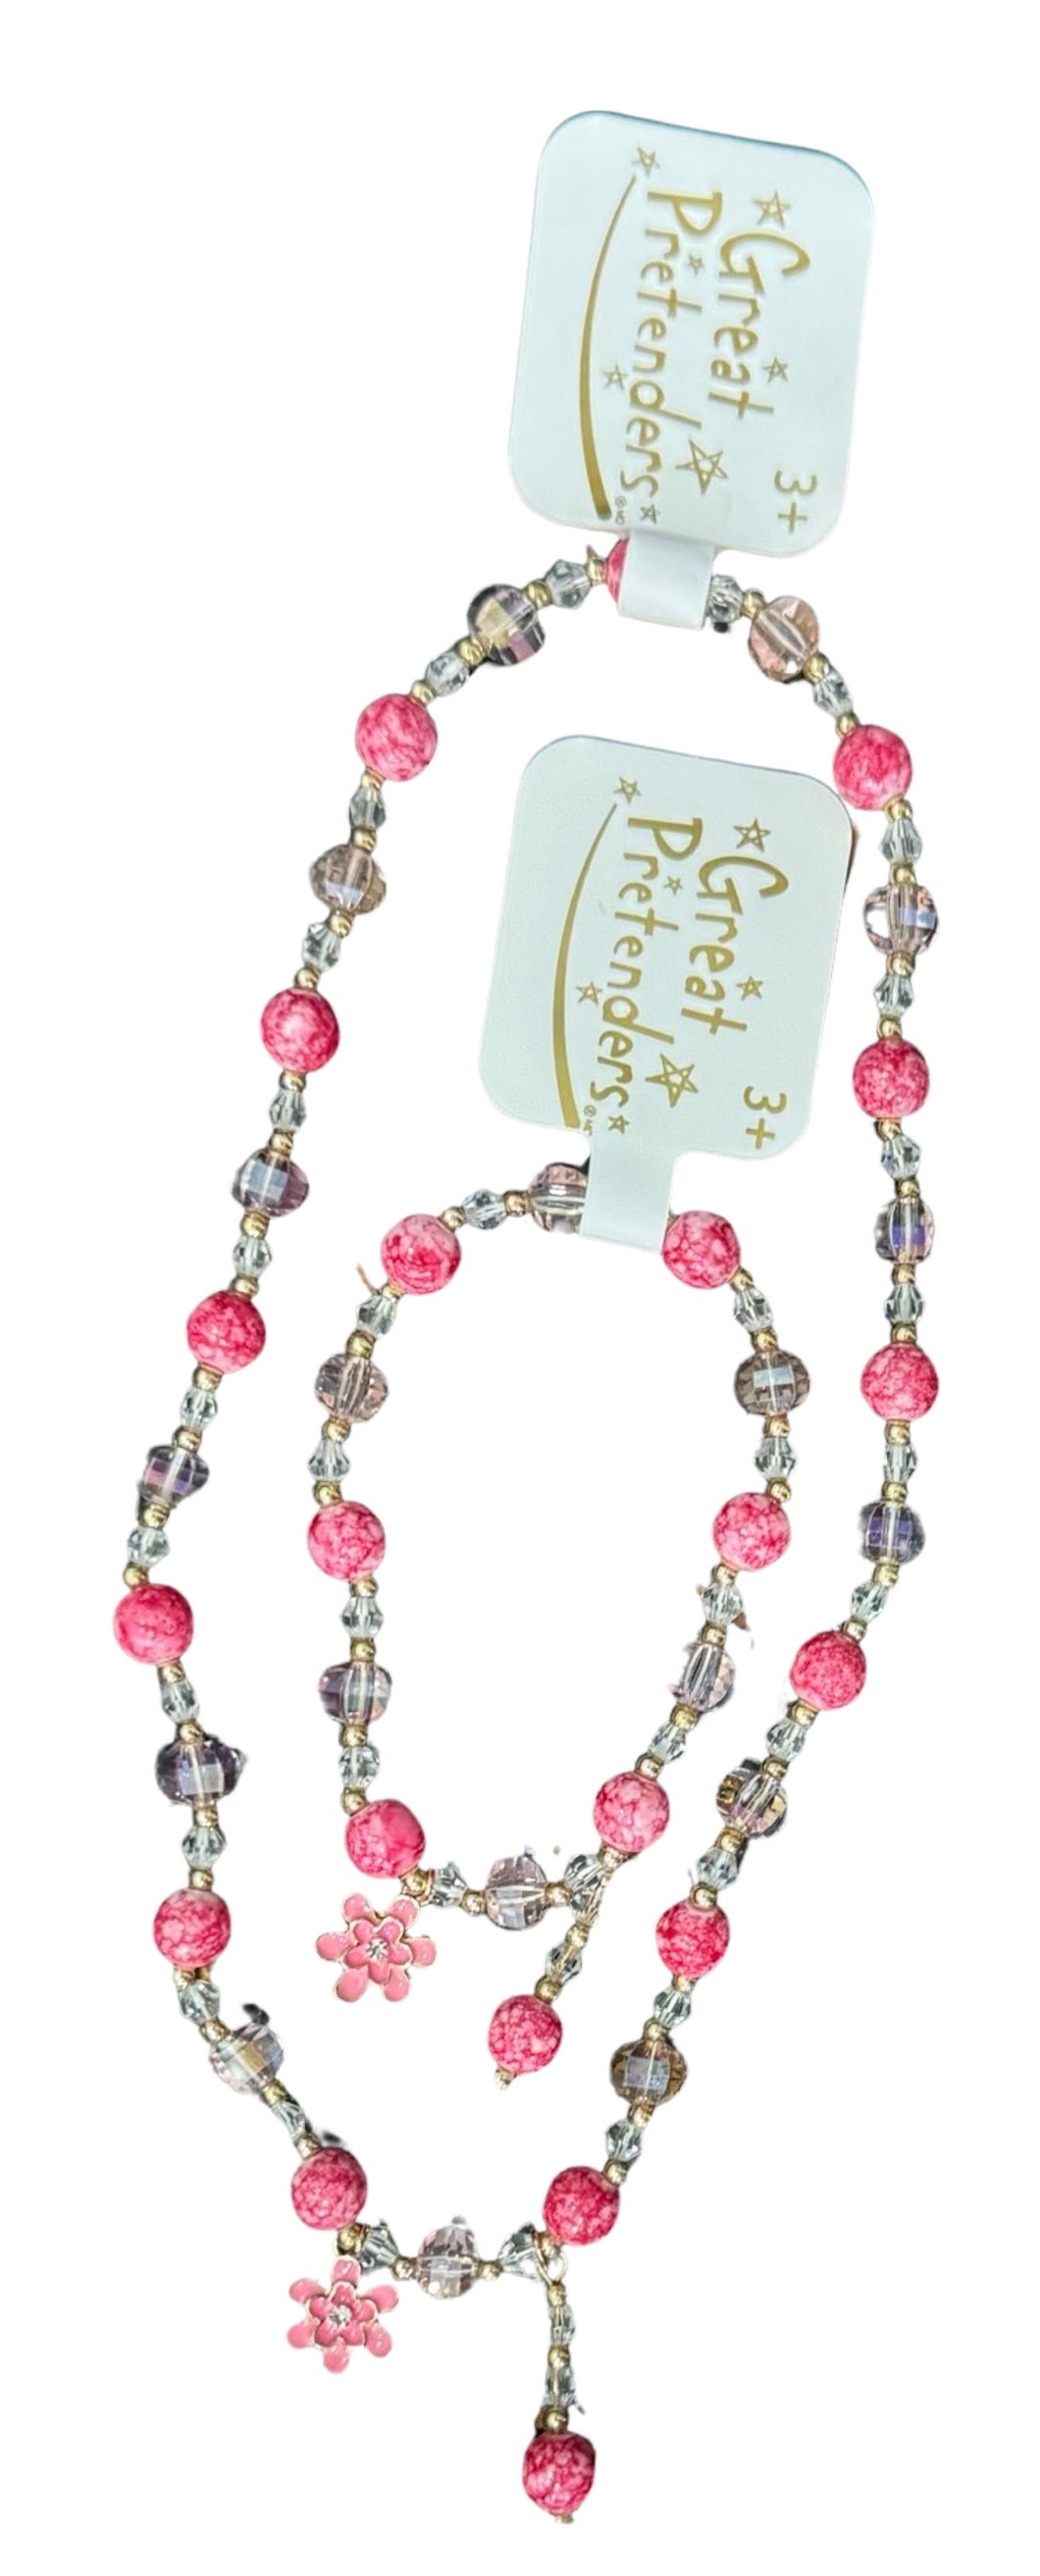 GREAT PRETENDERS - BOUTIQUE PINK
CRYSTAL Necklace ASSORTMENT